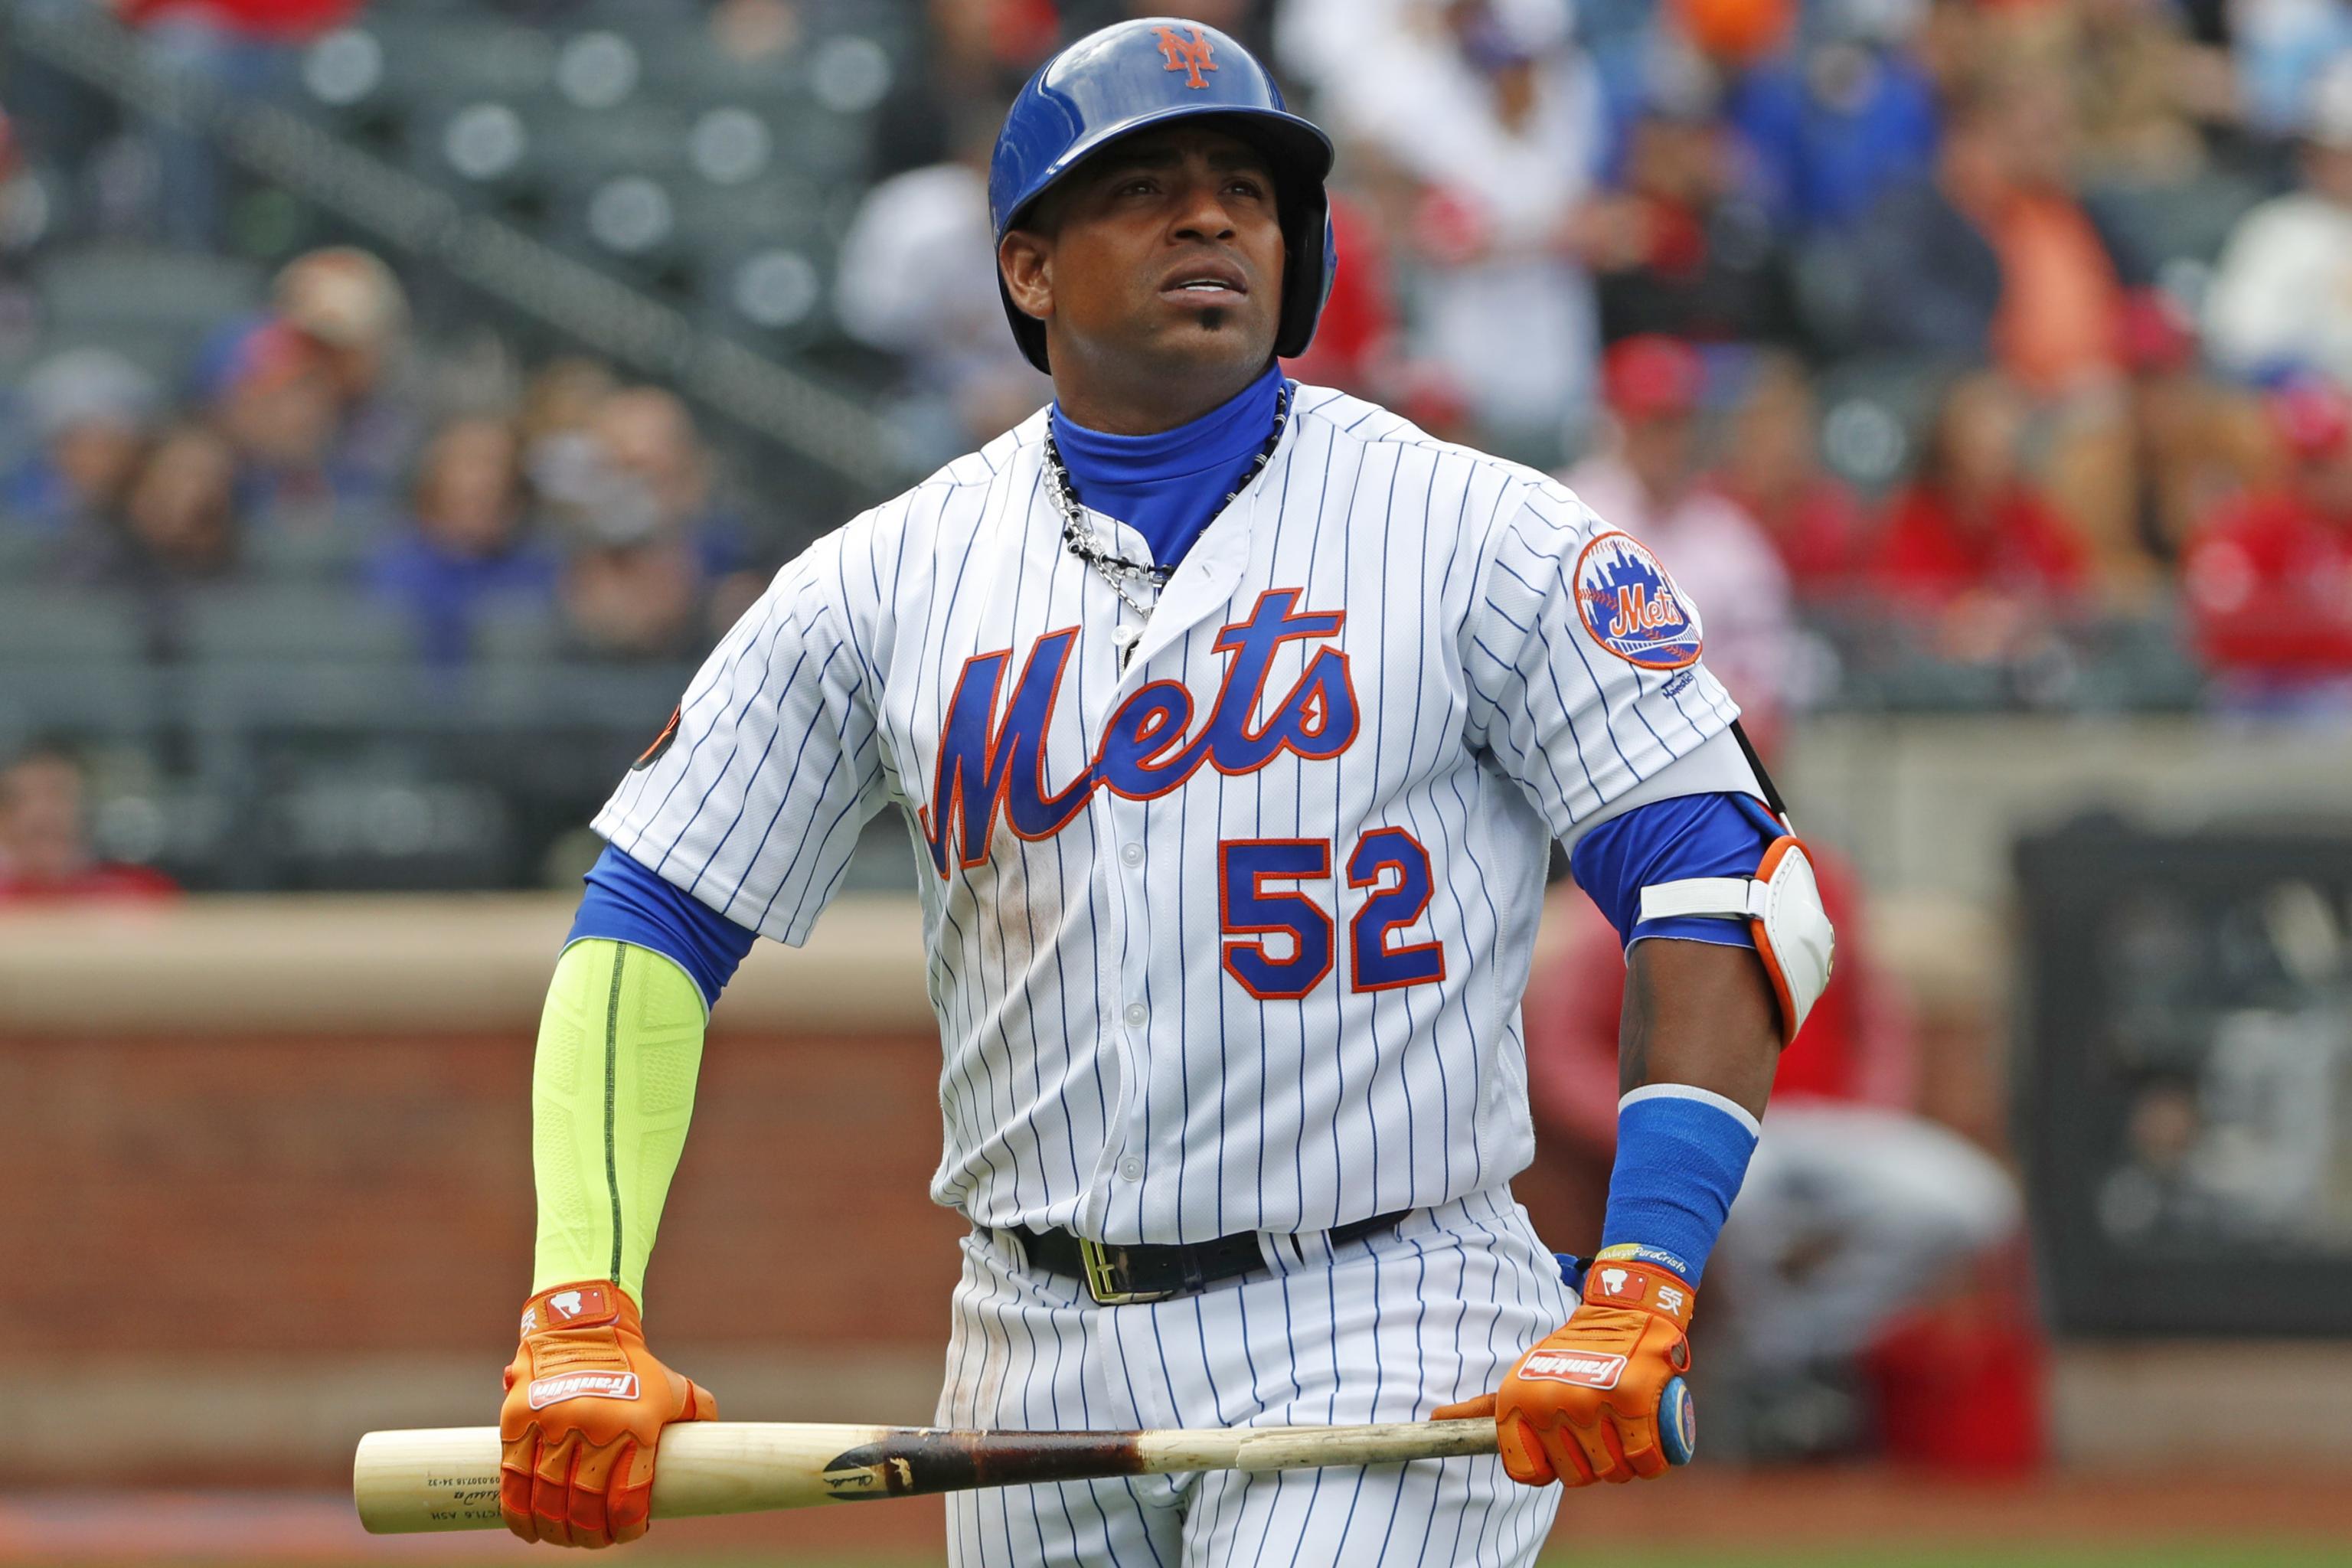 Mets' Yoenis Cespedes agrees to address media again